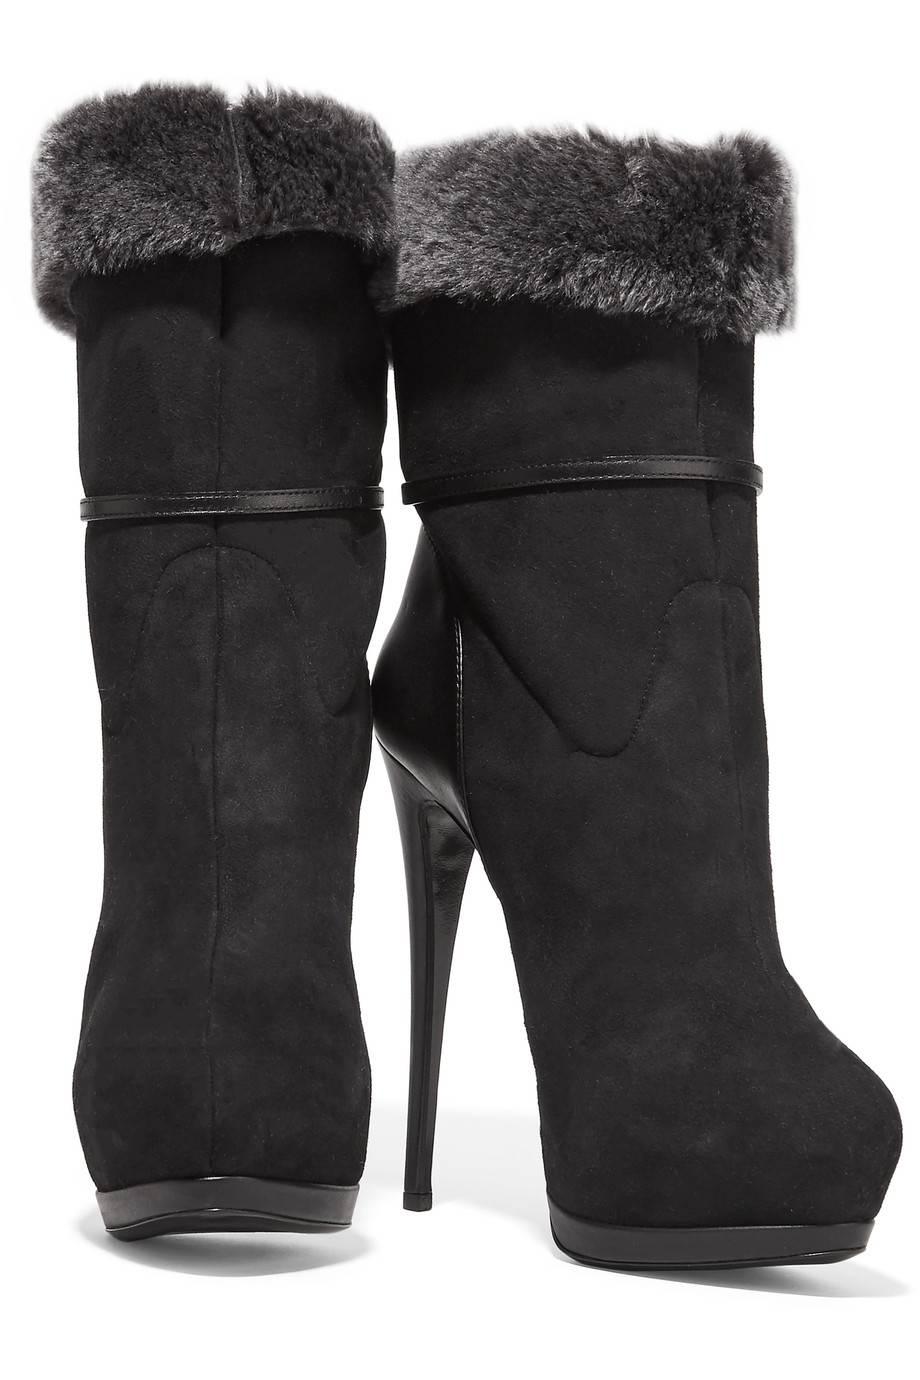 CURATOR'S NOTES

Giuseppe Zanotti NEW & SOLD OUT Black Suede Leather Fur Booties Shoes in Box  

Size IT 38.5
Suede
Faux fur
Leather trim
Pull on
Buckle strap detail
Made in Italy
Platform 0.5"
Heel height 6"
Includes original Giuseppe